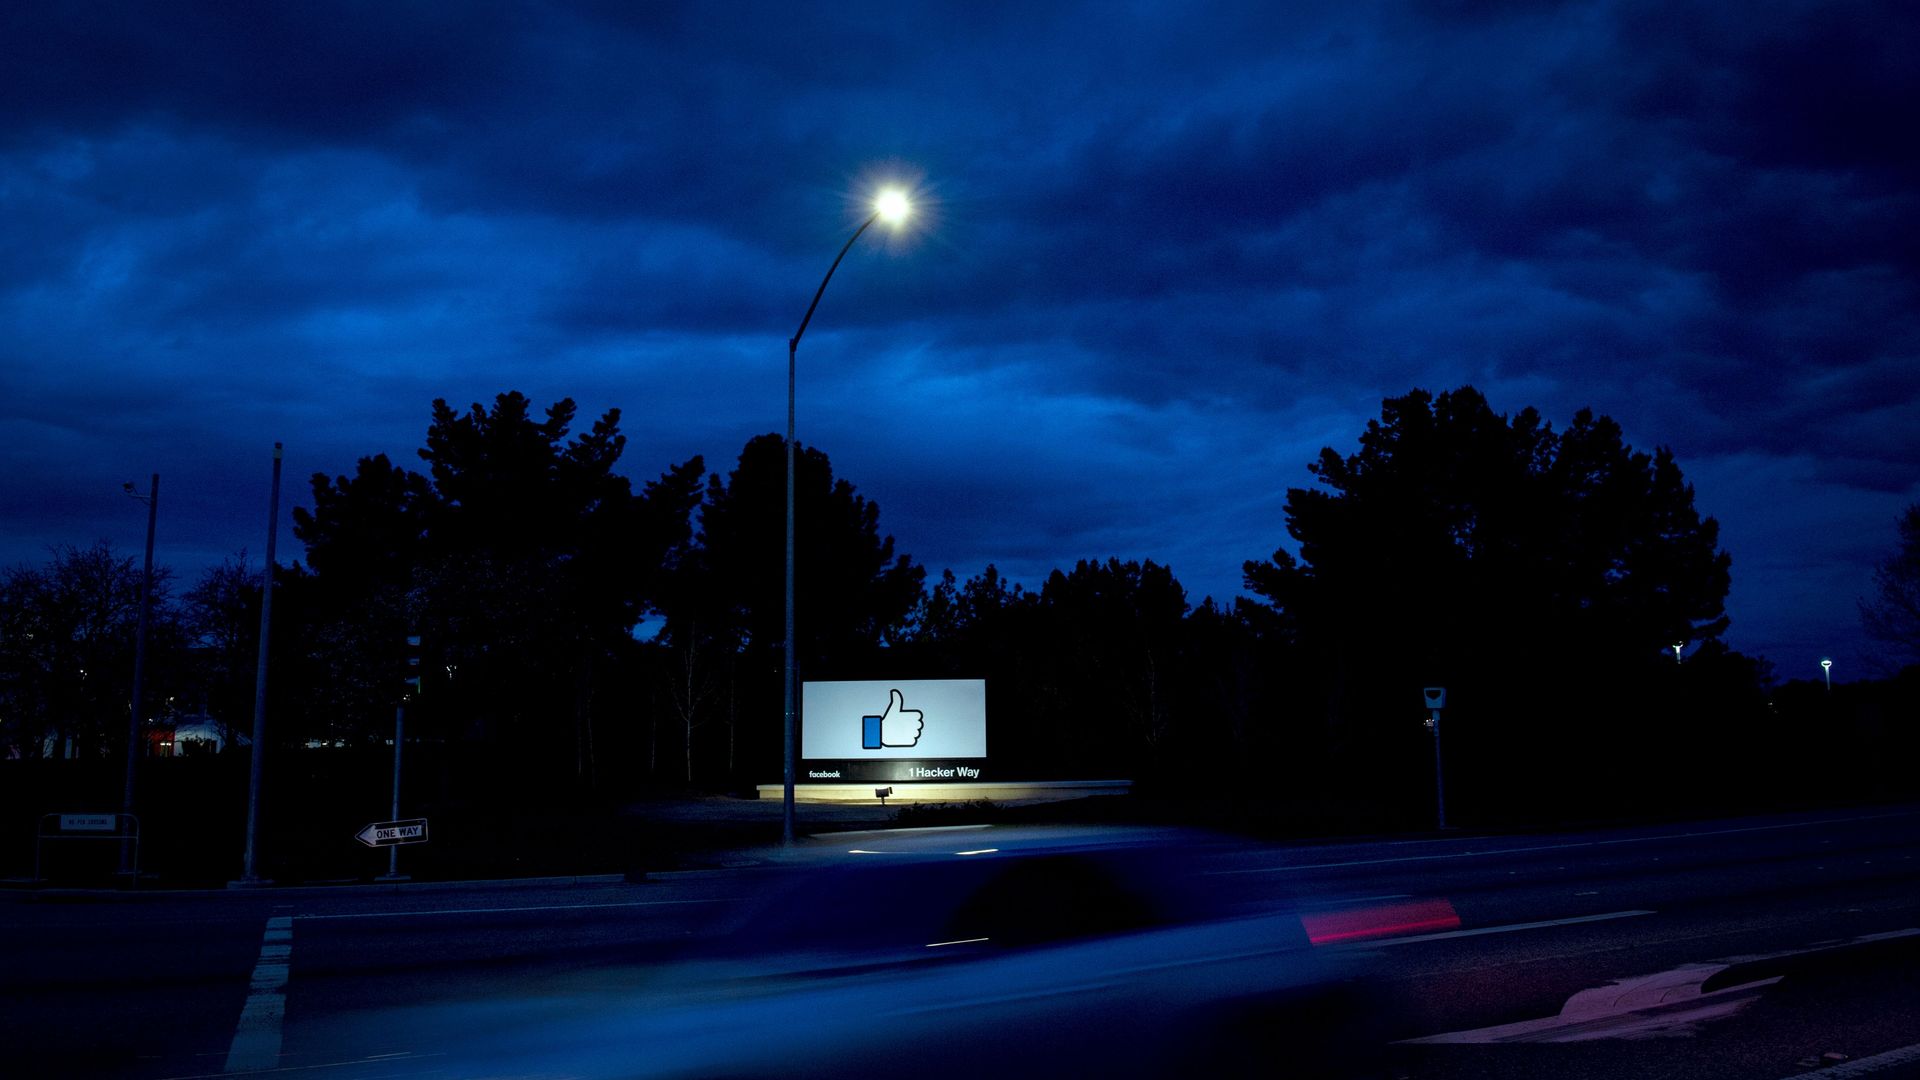 A sign in front of Facebook's headquarters at night